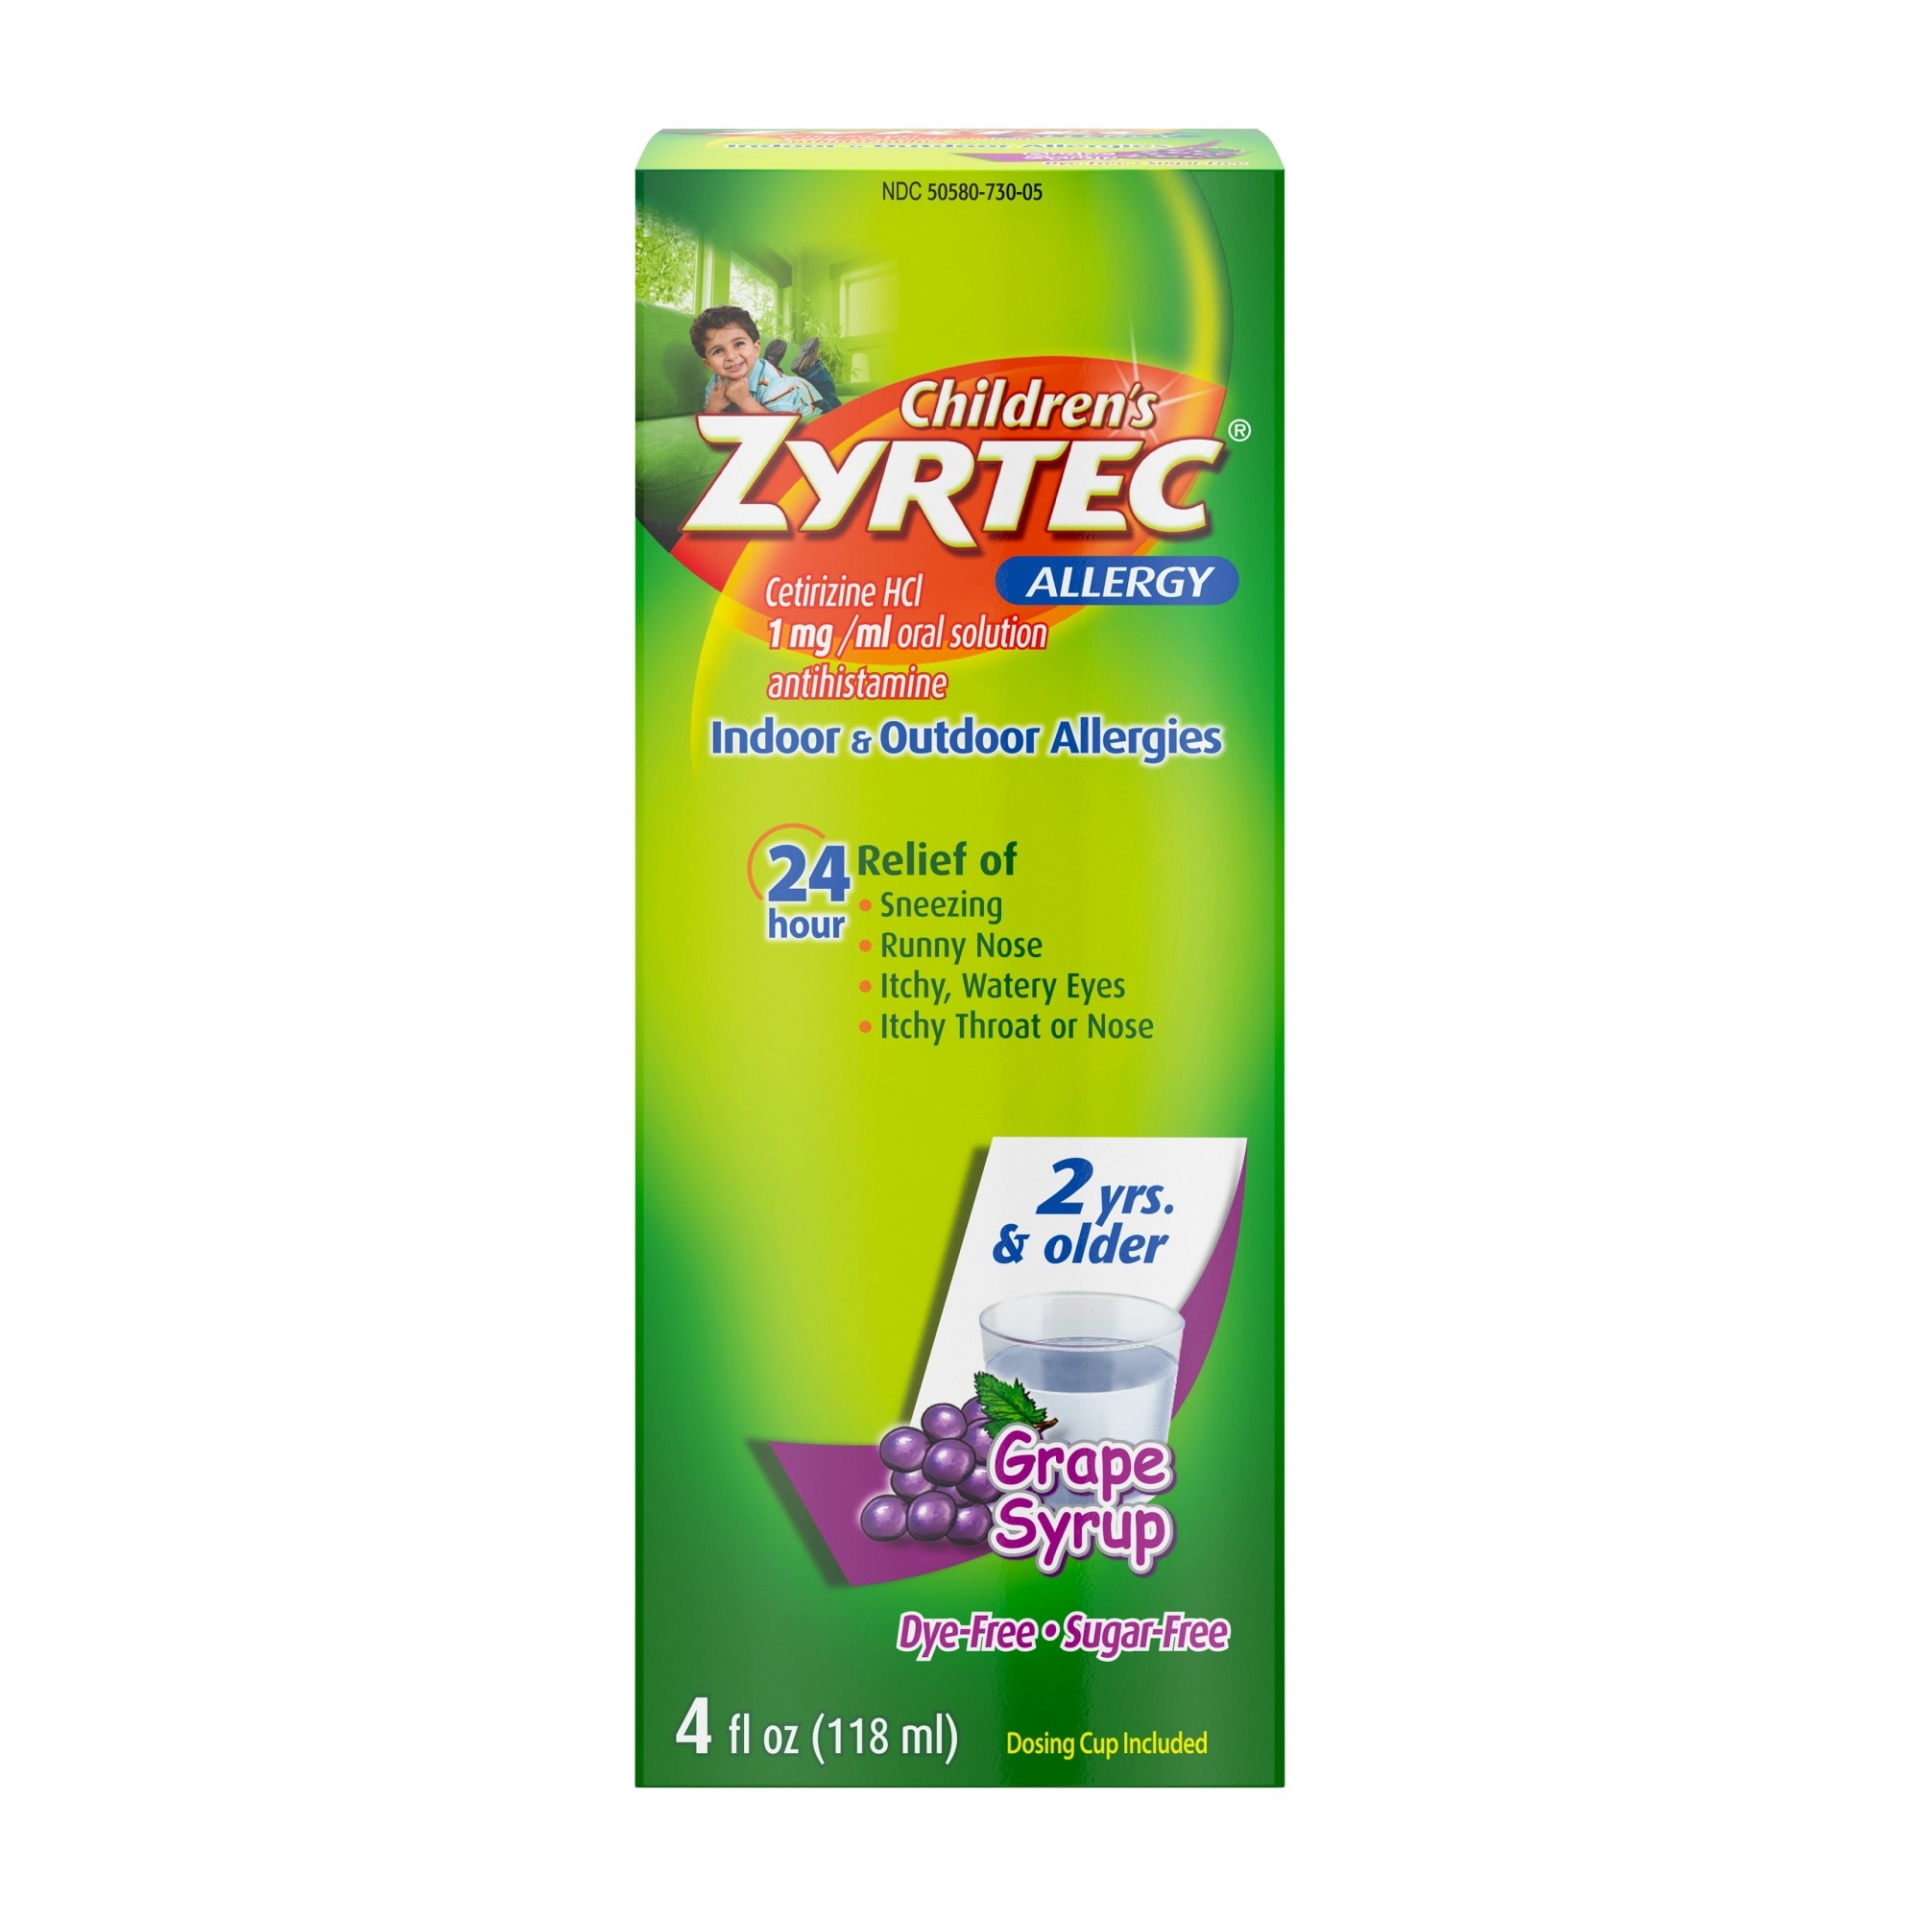 slide 1 of 5, Zyrtec 24 Hr Children's Allergy Syrup with 5mg Cetirizine, Dye-Free & Sugar-Free 24-Hour All Day Kid's Allergy Relief Medicine for Indoor & Outdoor Allergies, Grape Flavor, 4 fl oz